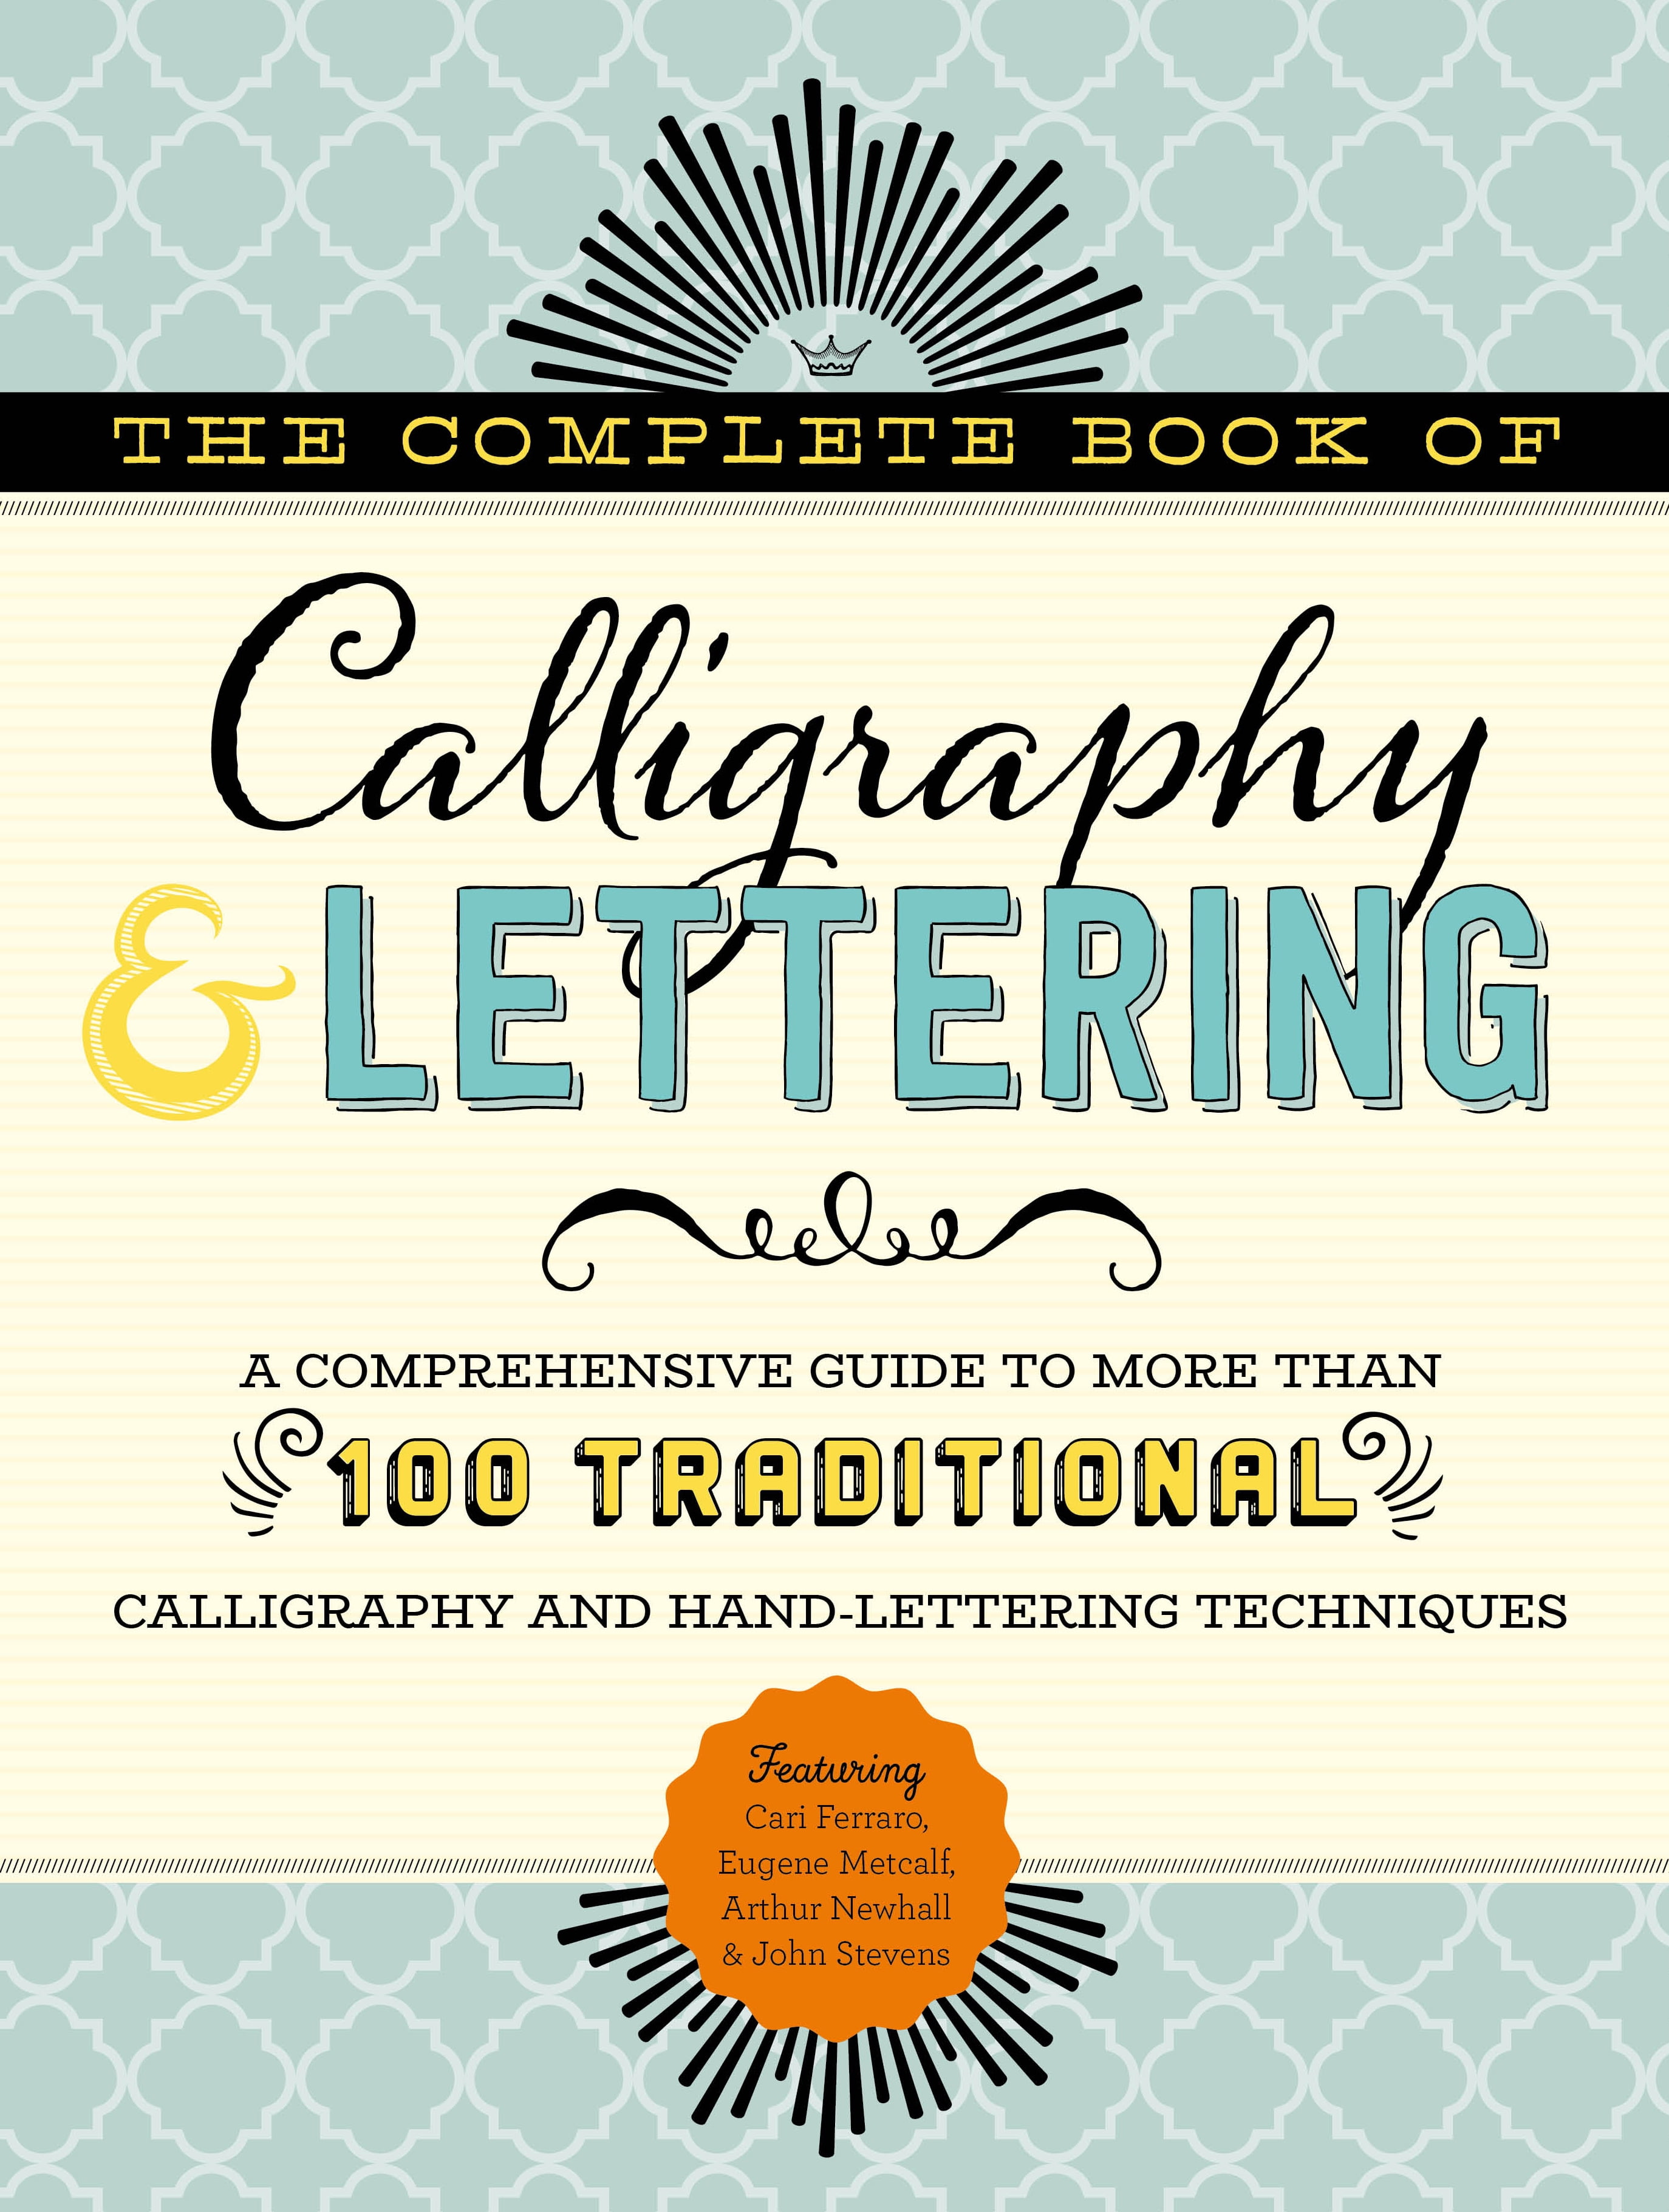 The Complete Book of Calligraphy Lettering A comprehensive guide to
more than 100 traditional calligraphy and handlettering techniques
Epub-Ebook